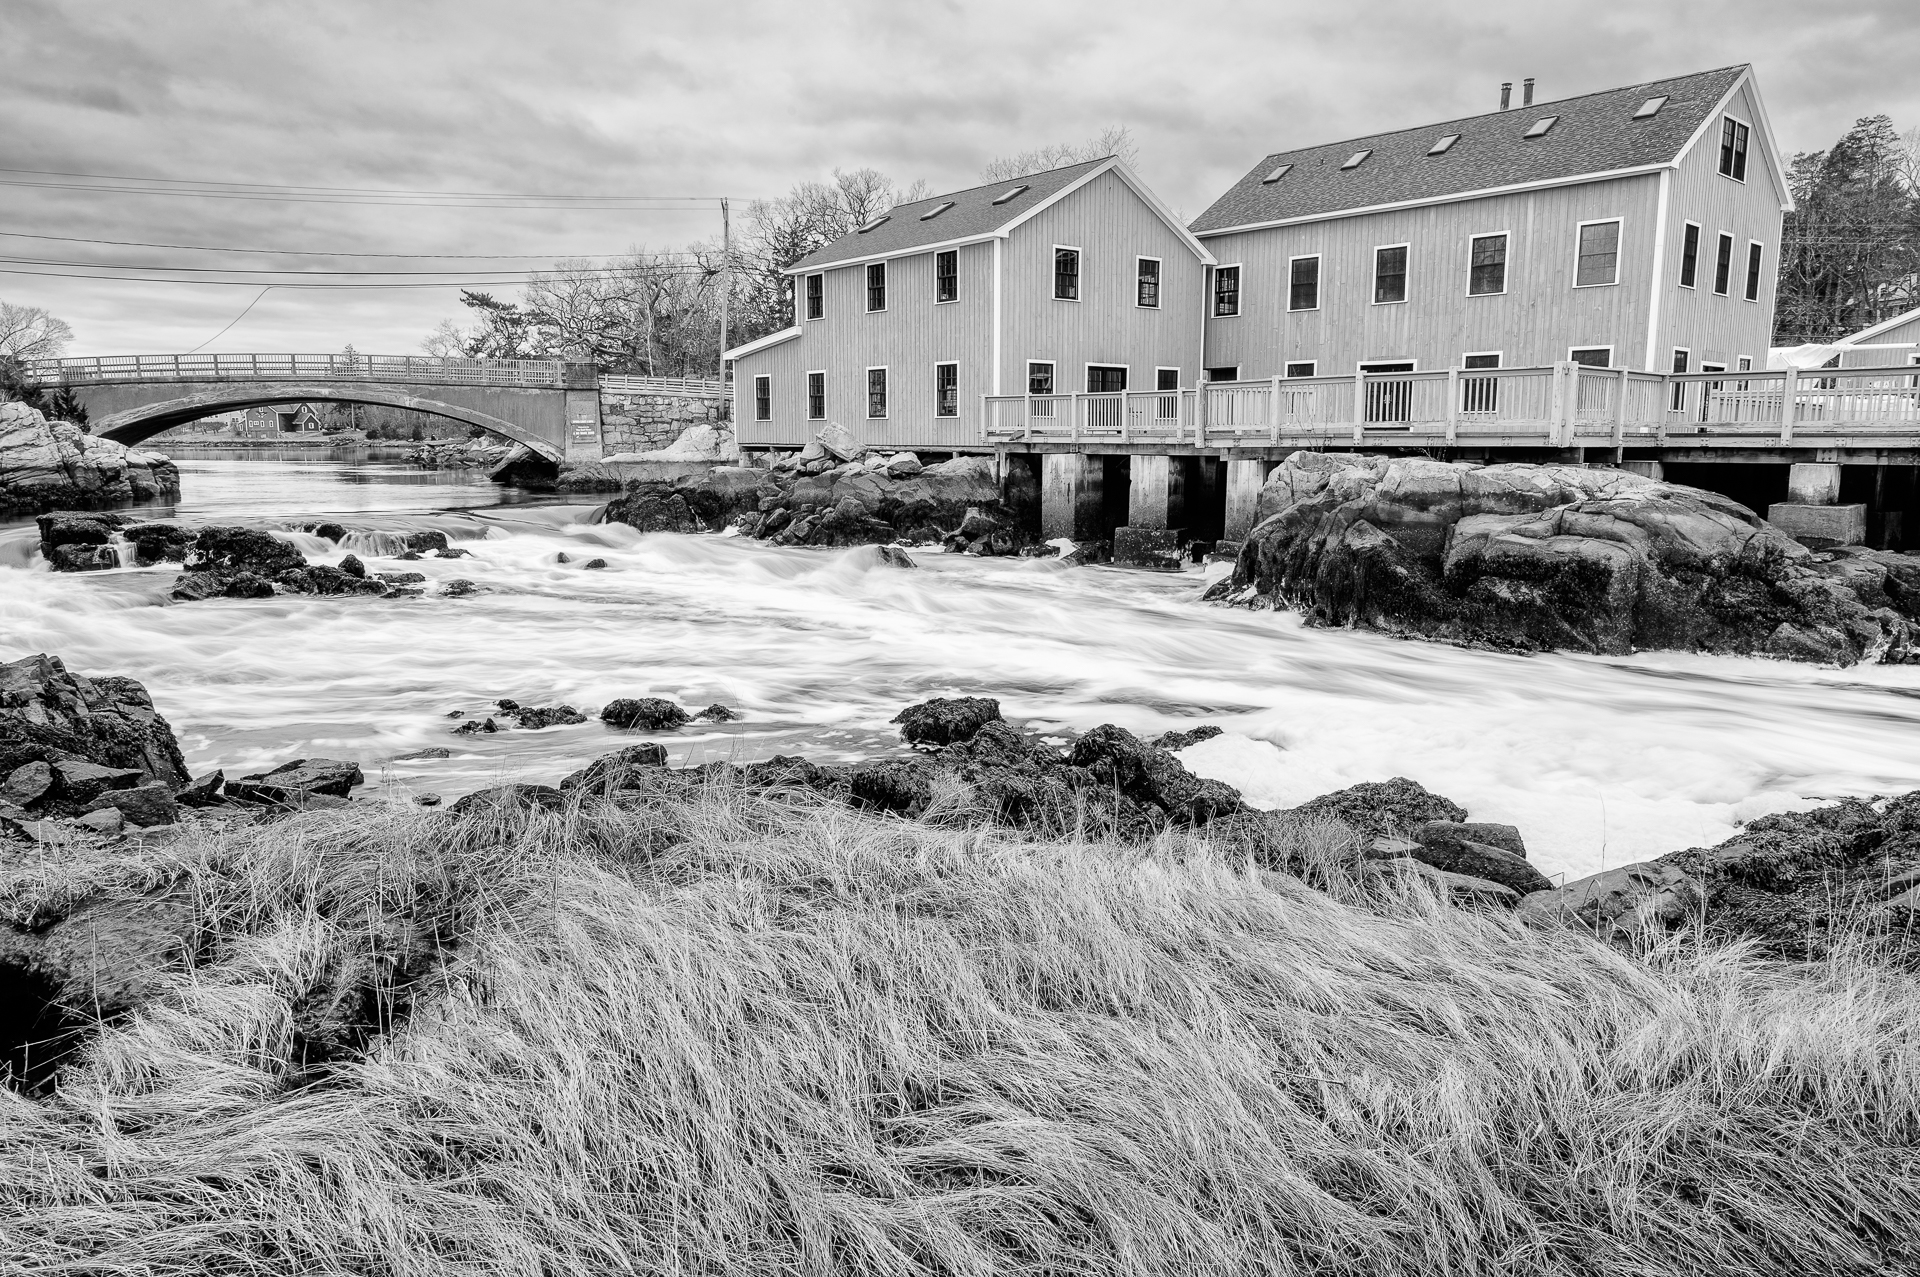 Water rushing by the Cohasset Lobster Pound